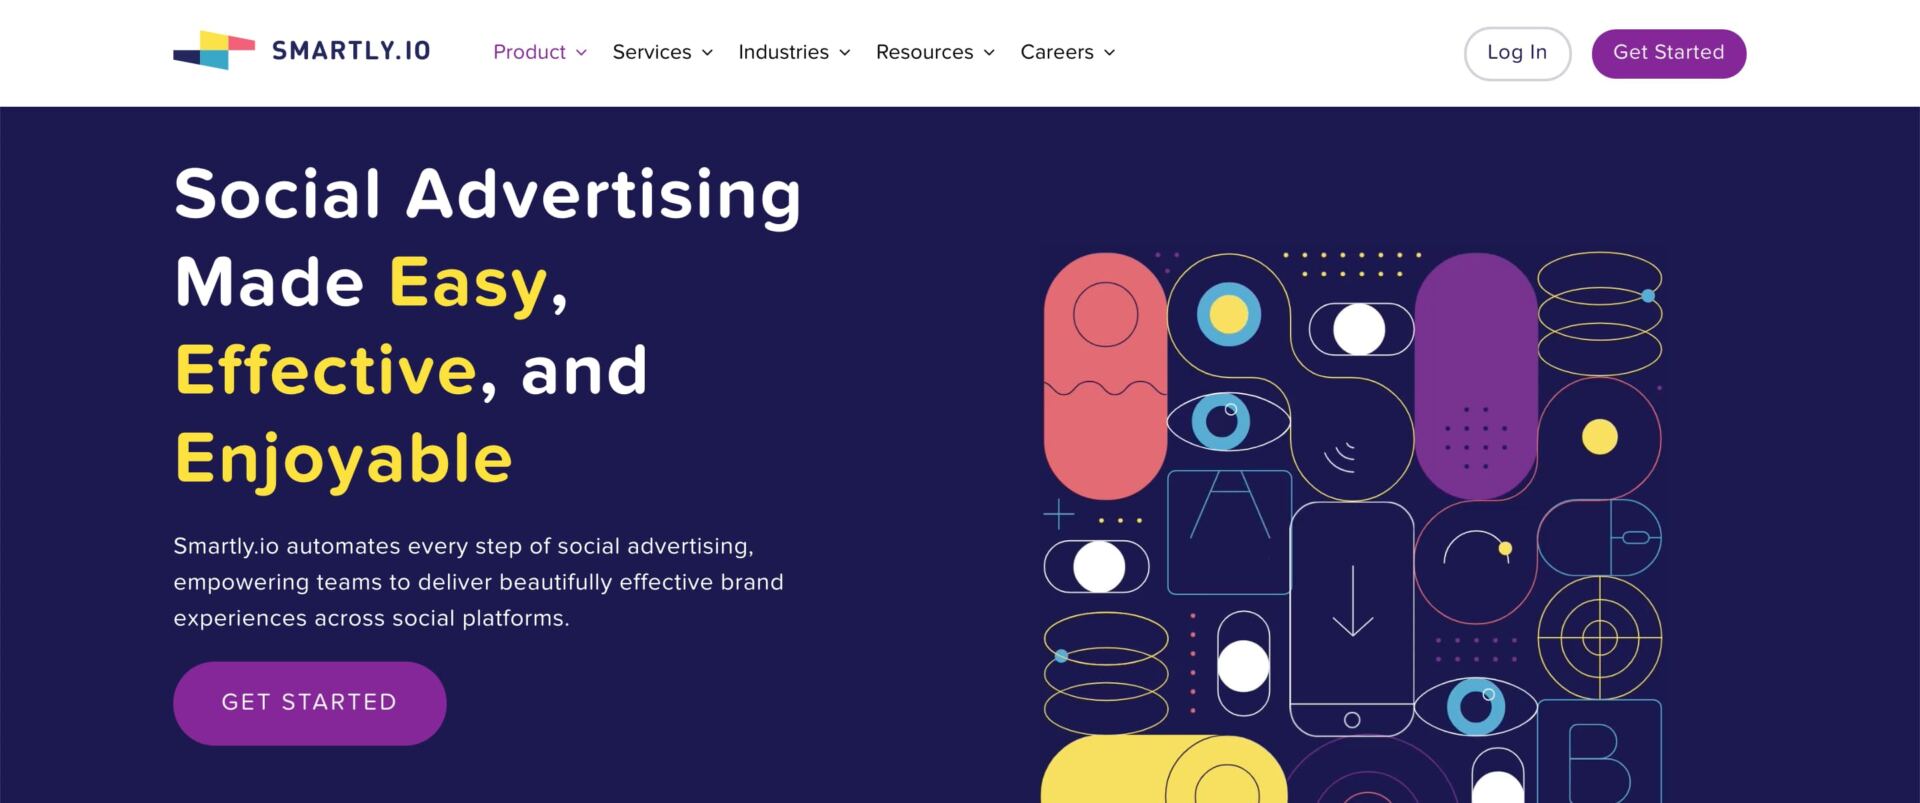 smartly.io advertising management system example